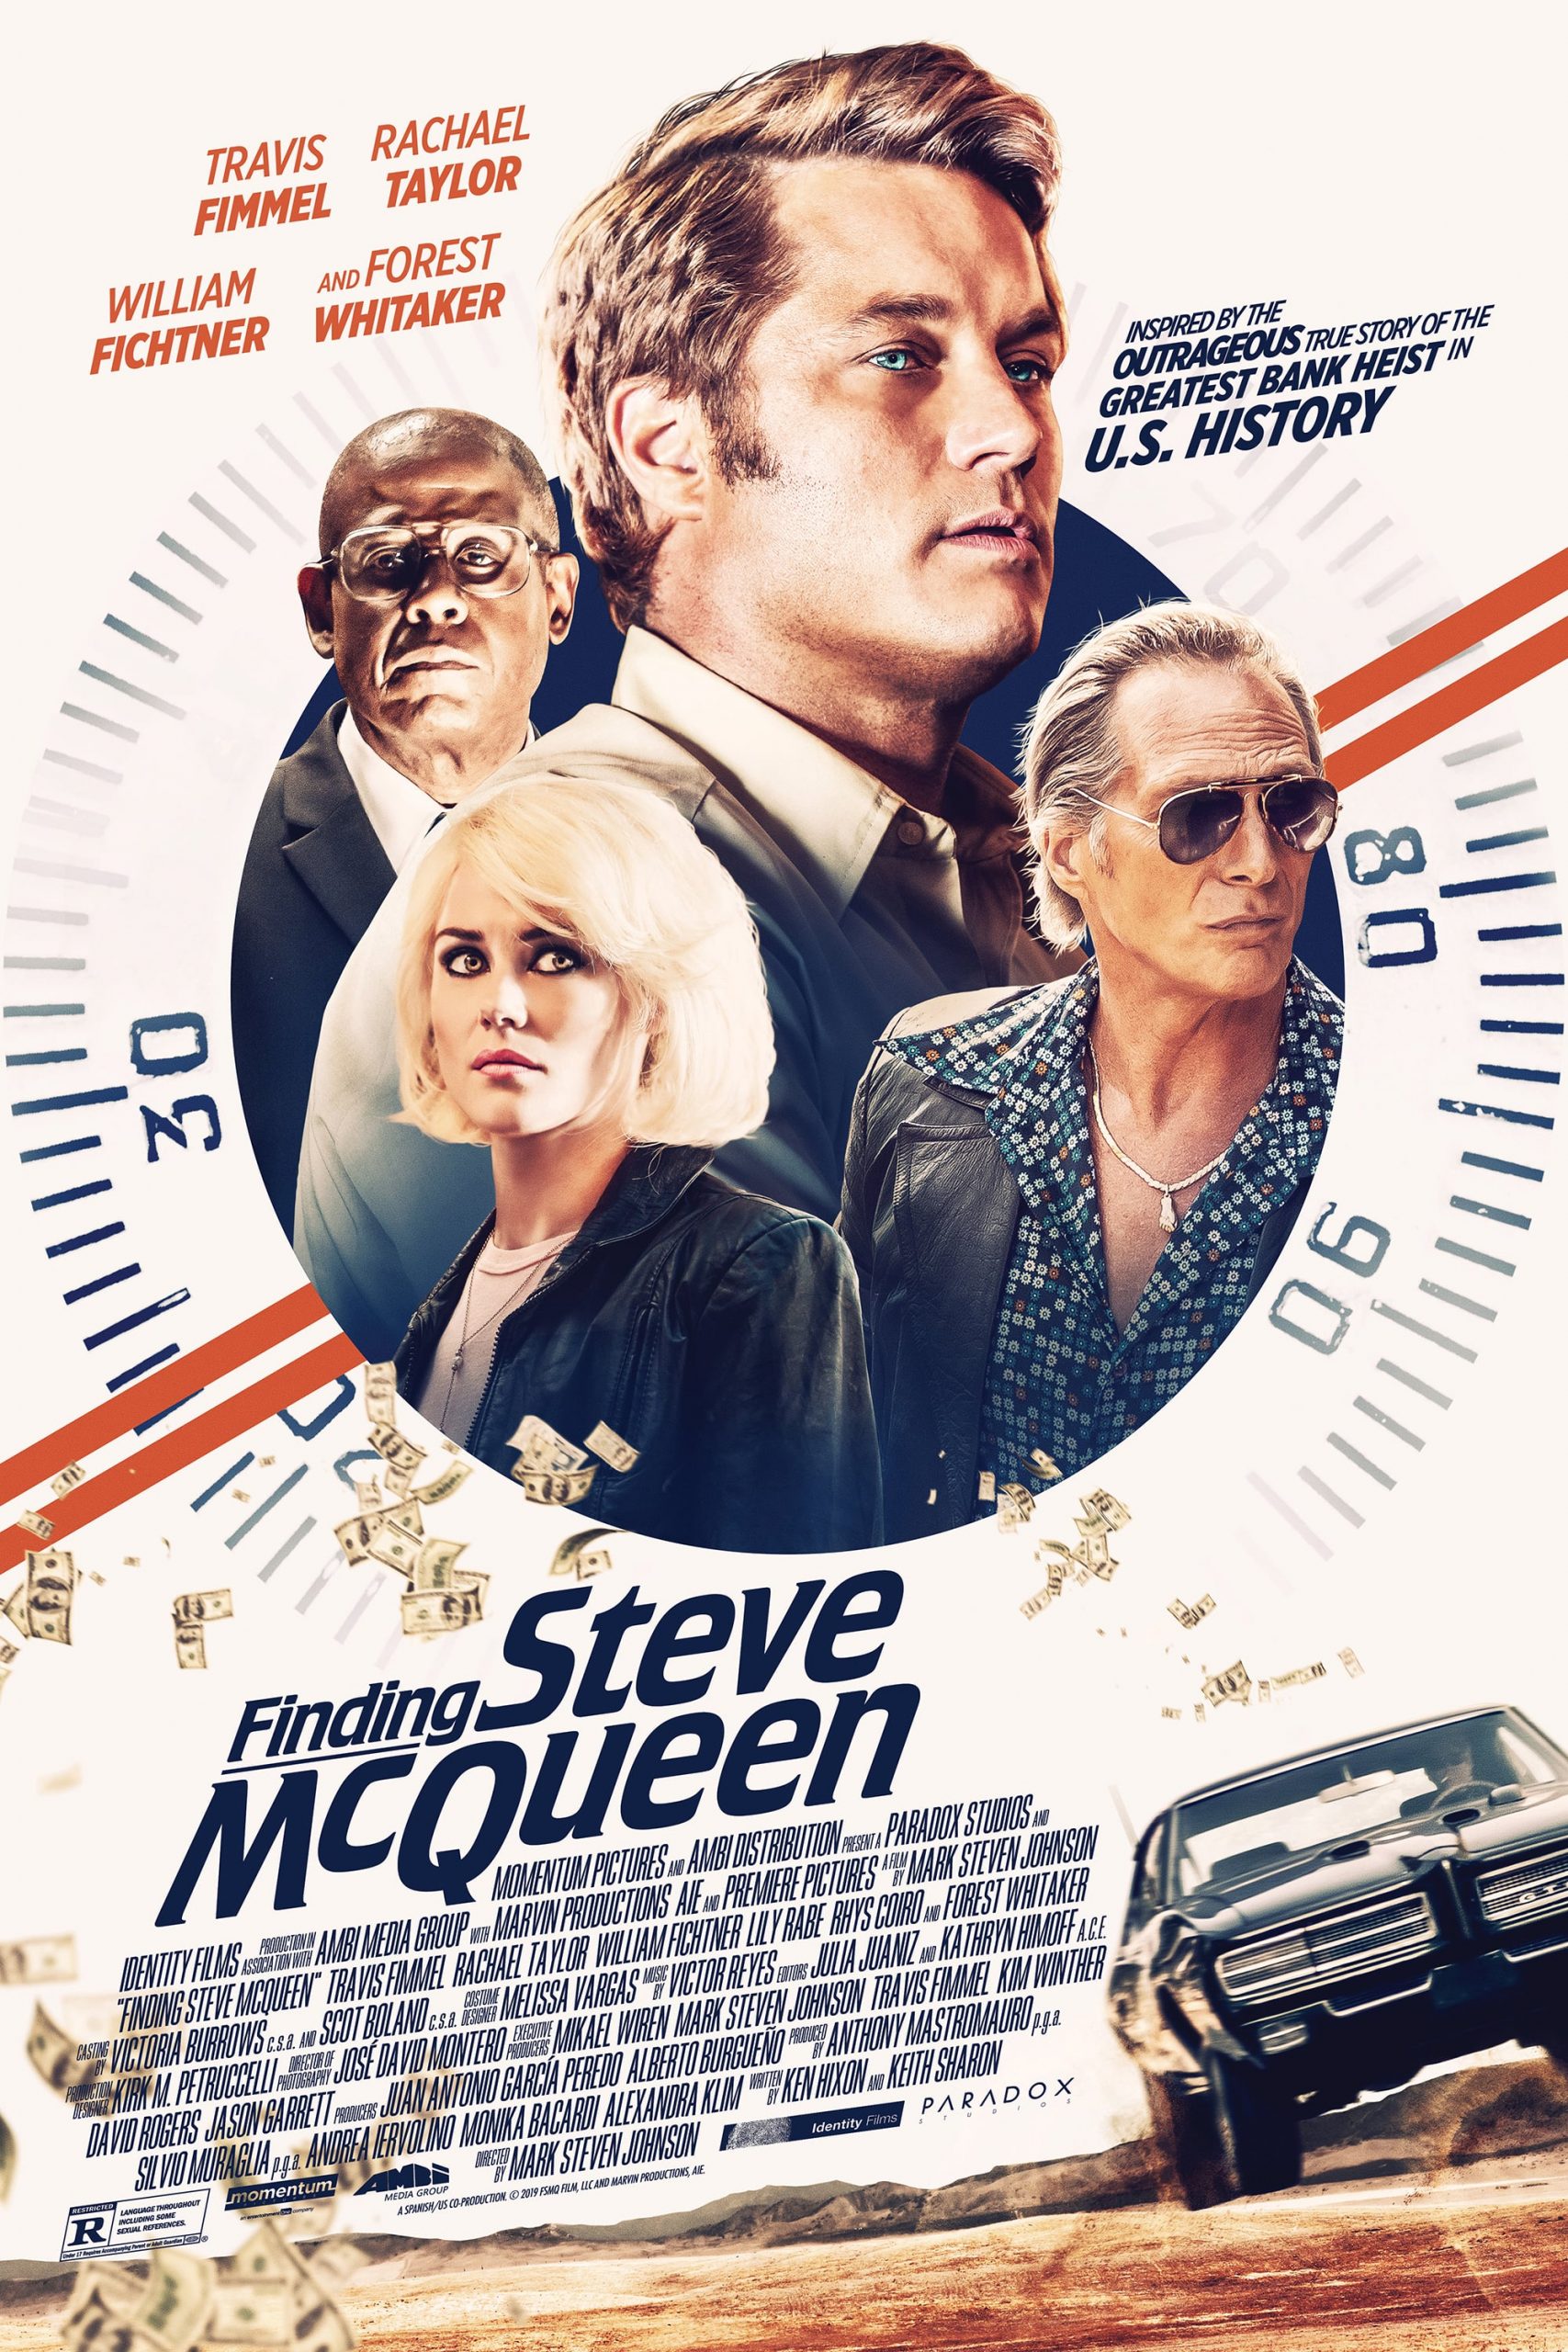 finding steve mcqueen scaled